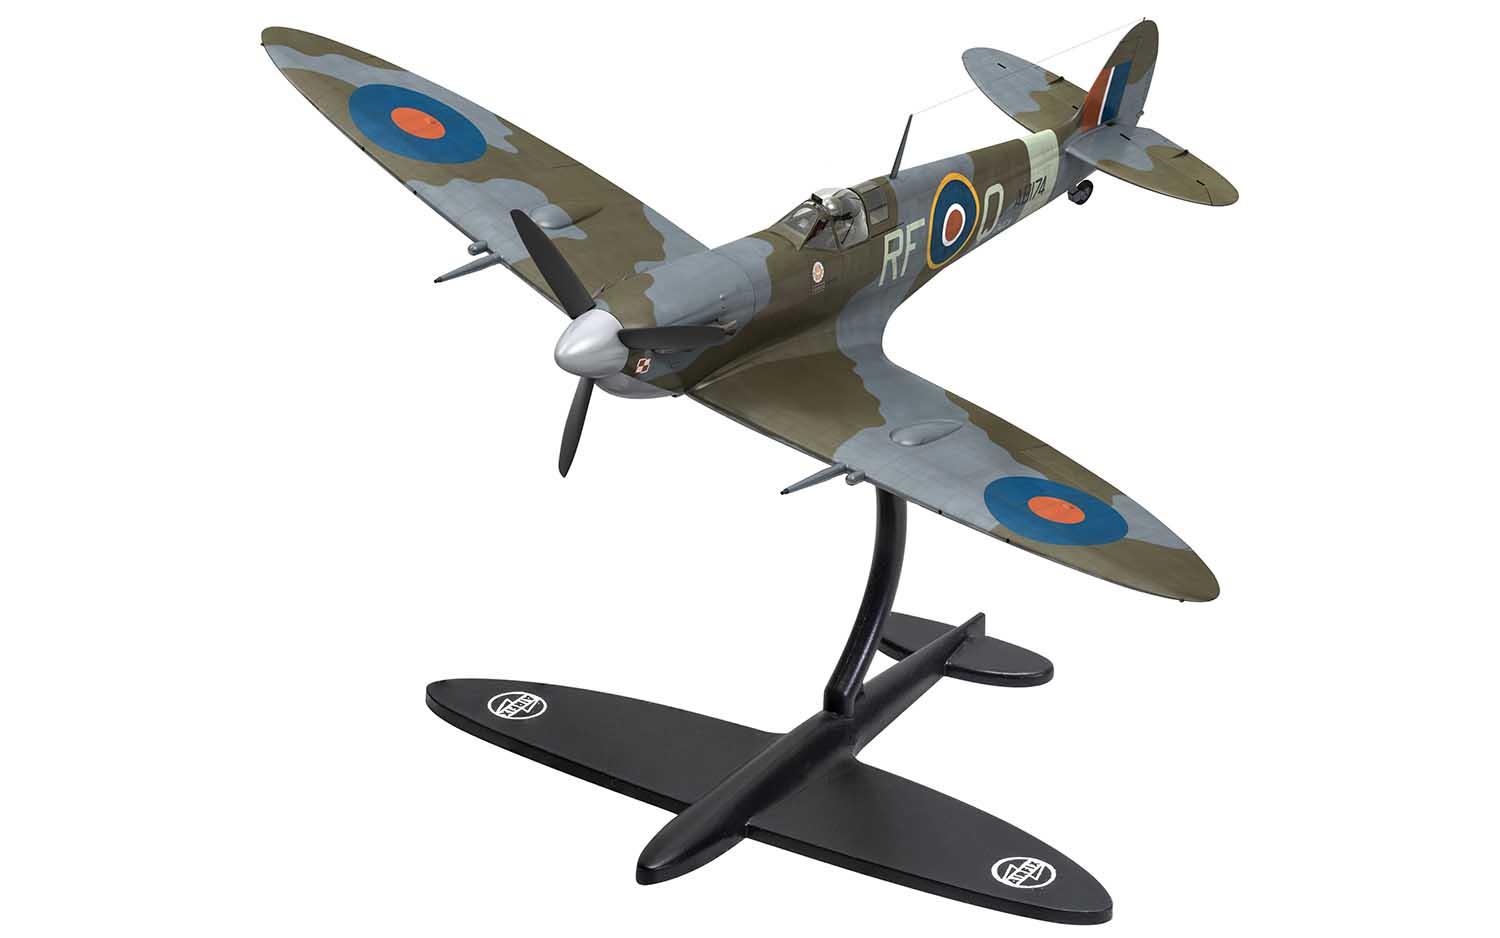 Model of a Spitfire aircraft painted in khaki green and grey on a black stand.